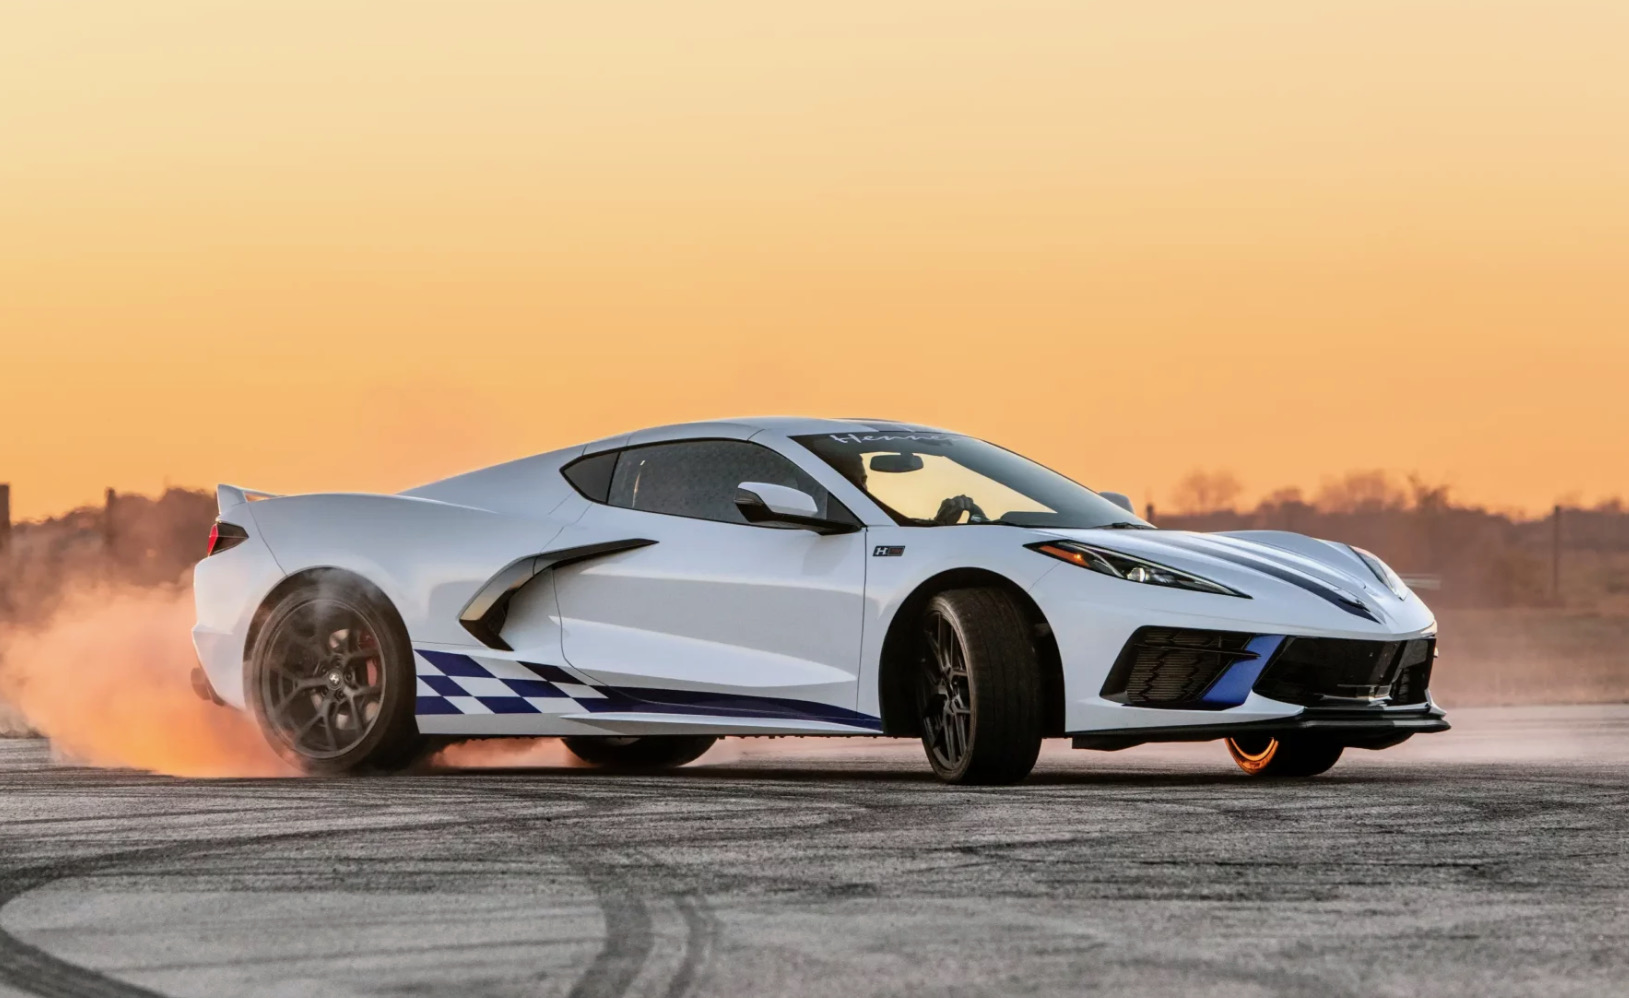 Hennessey H700 tune for Corvette C8 Stingray adds 44% more power